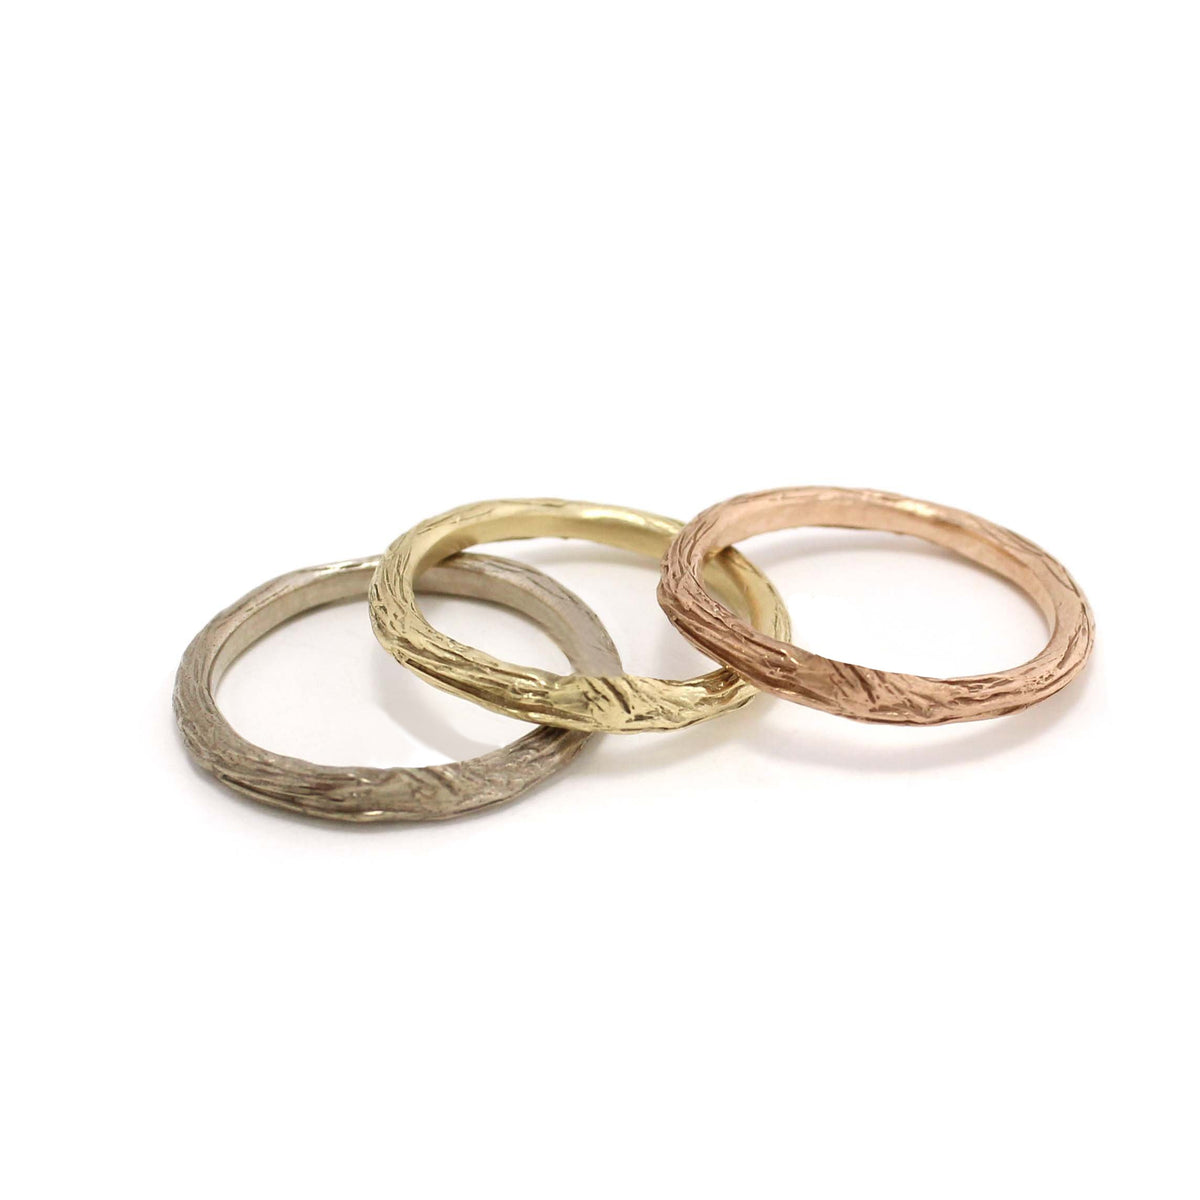 Gold Twig Ring - your choice of gold - Wedding Ring 18K Palladium White Gold 14K Rose Gold 3917 - handmade by Beth Millner Jewelry